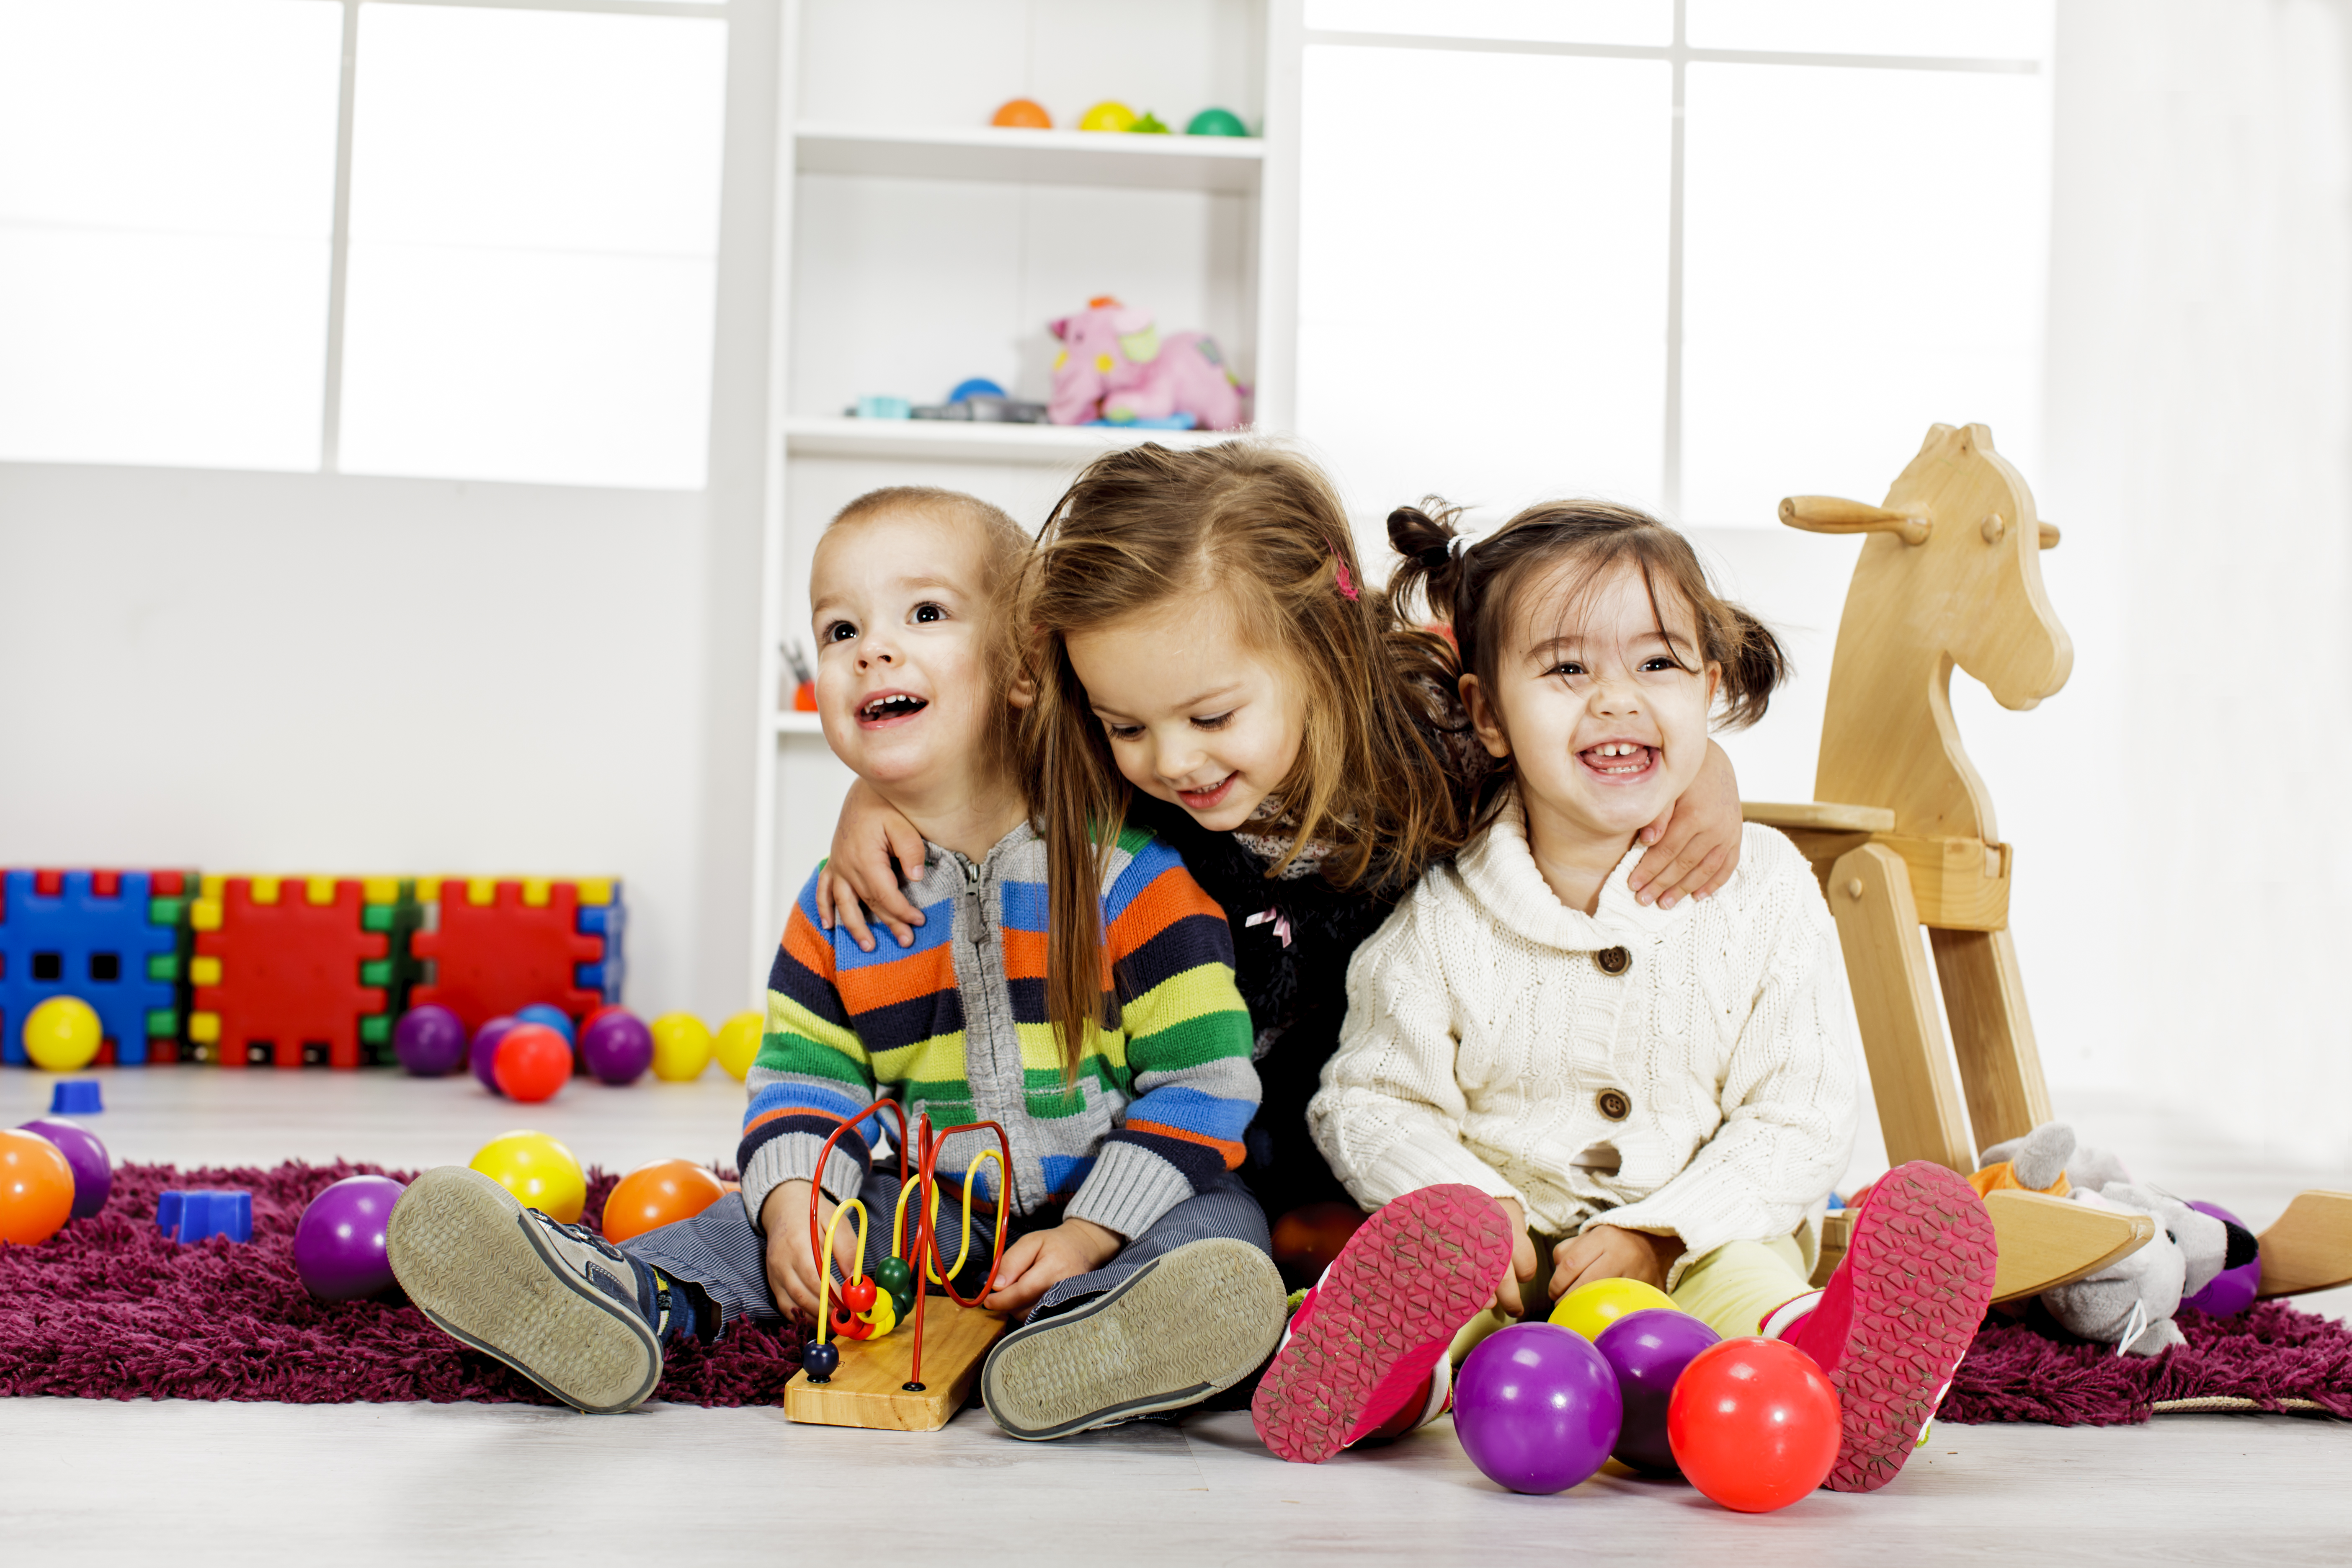 Three preschoolers sitting and smiling